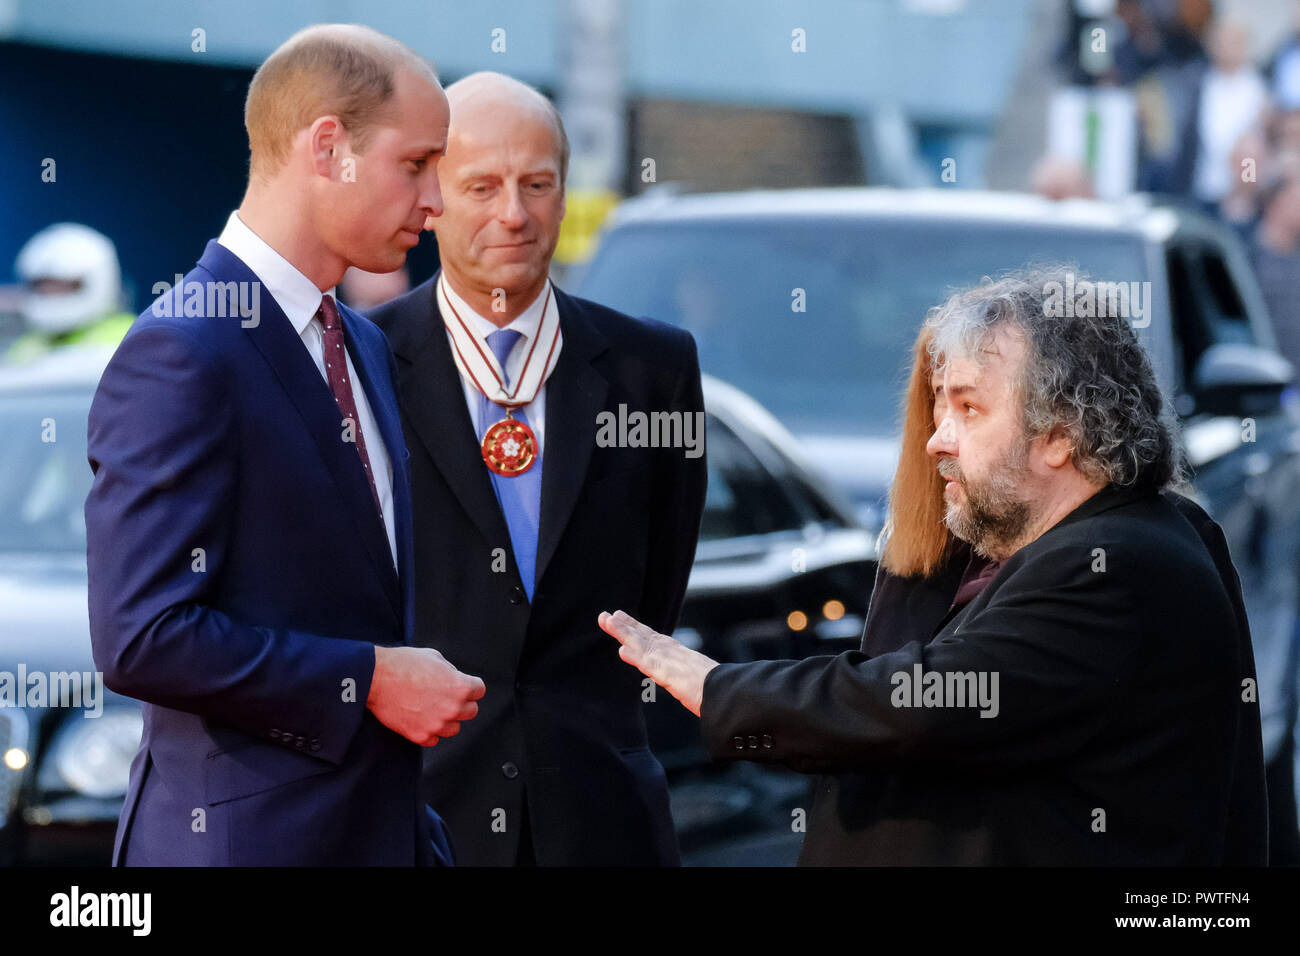 Prince William, Duke of Cambridge and Director Peter Jackson  at the London Film Festival Screening of They Shall Not grow Old on Tuesday 16 October 2018 held at BFI Southbank, London. Pictured: Director Peter Jackson talks to Prince William, Duke of Cambridge, arrives on the red carpet. Picture by Julie Edwards. Stock Photo